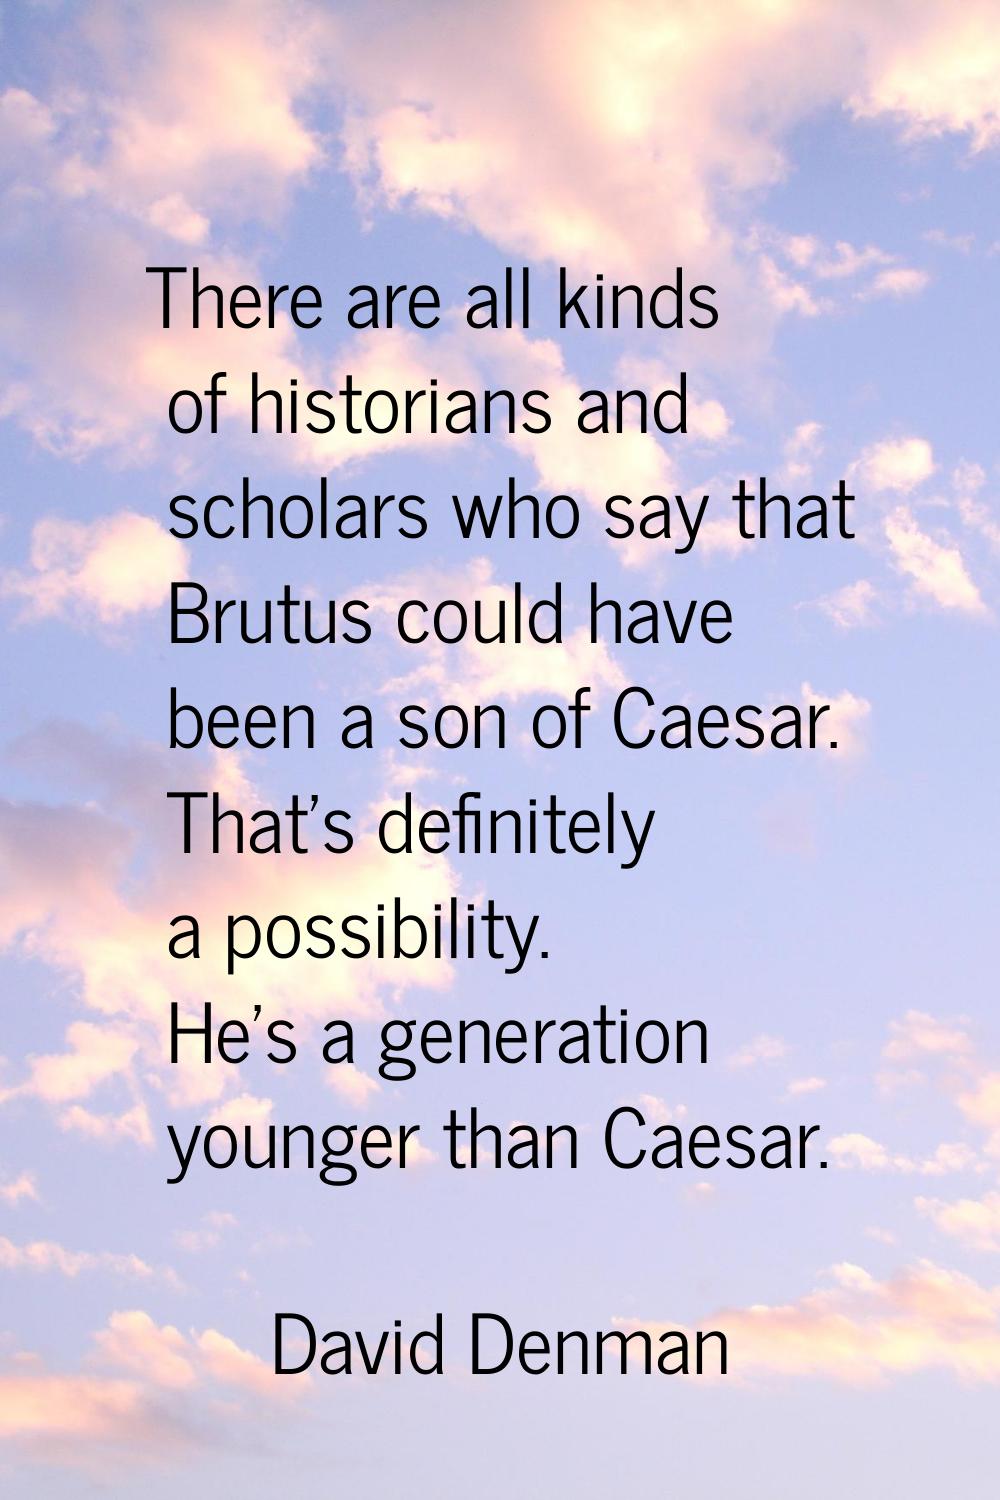 There are all kinds of historians and scholars who say that Brutus could have been a son of Caesar.